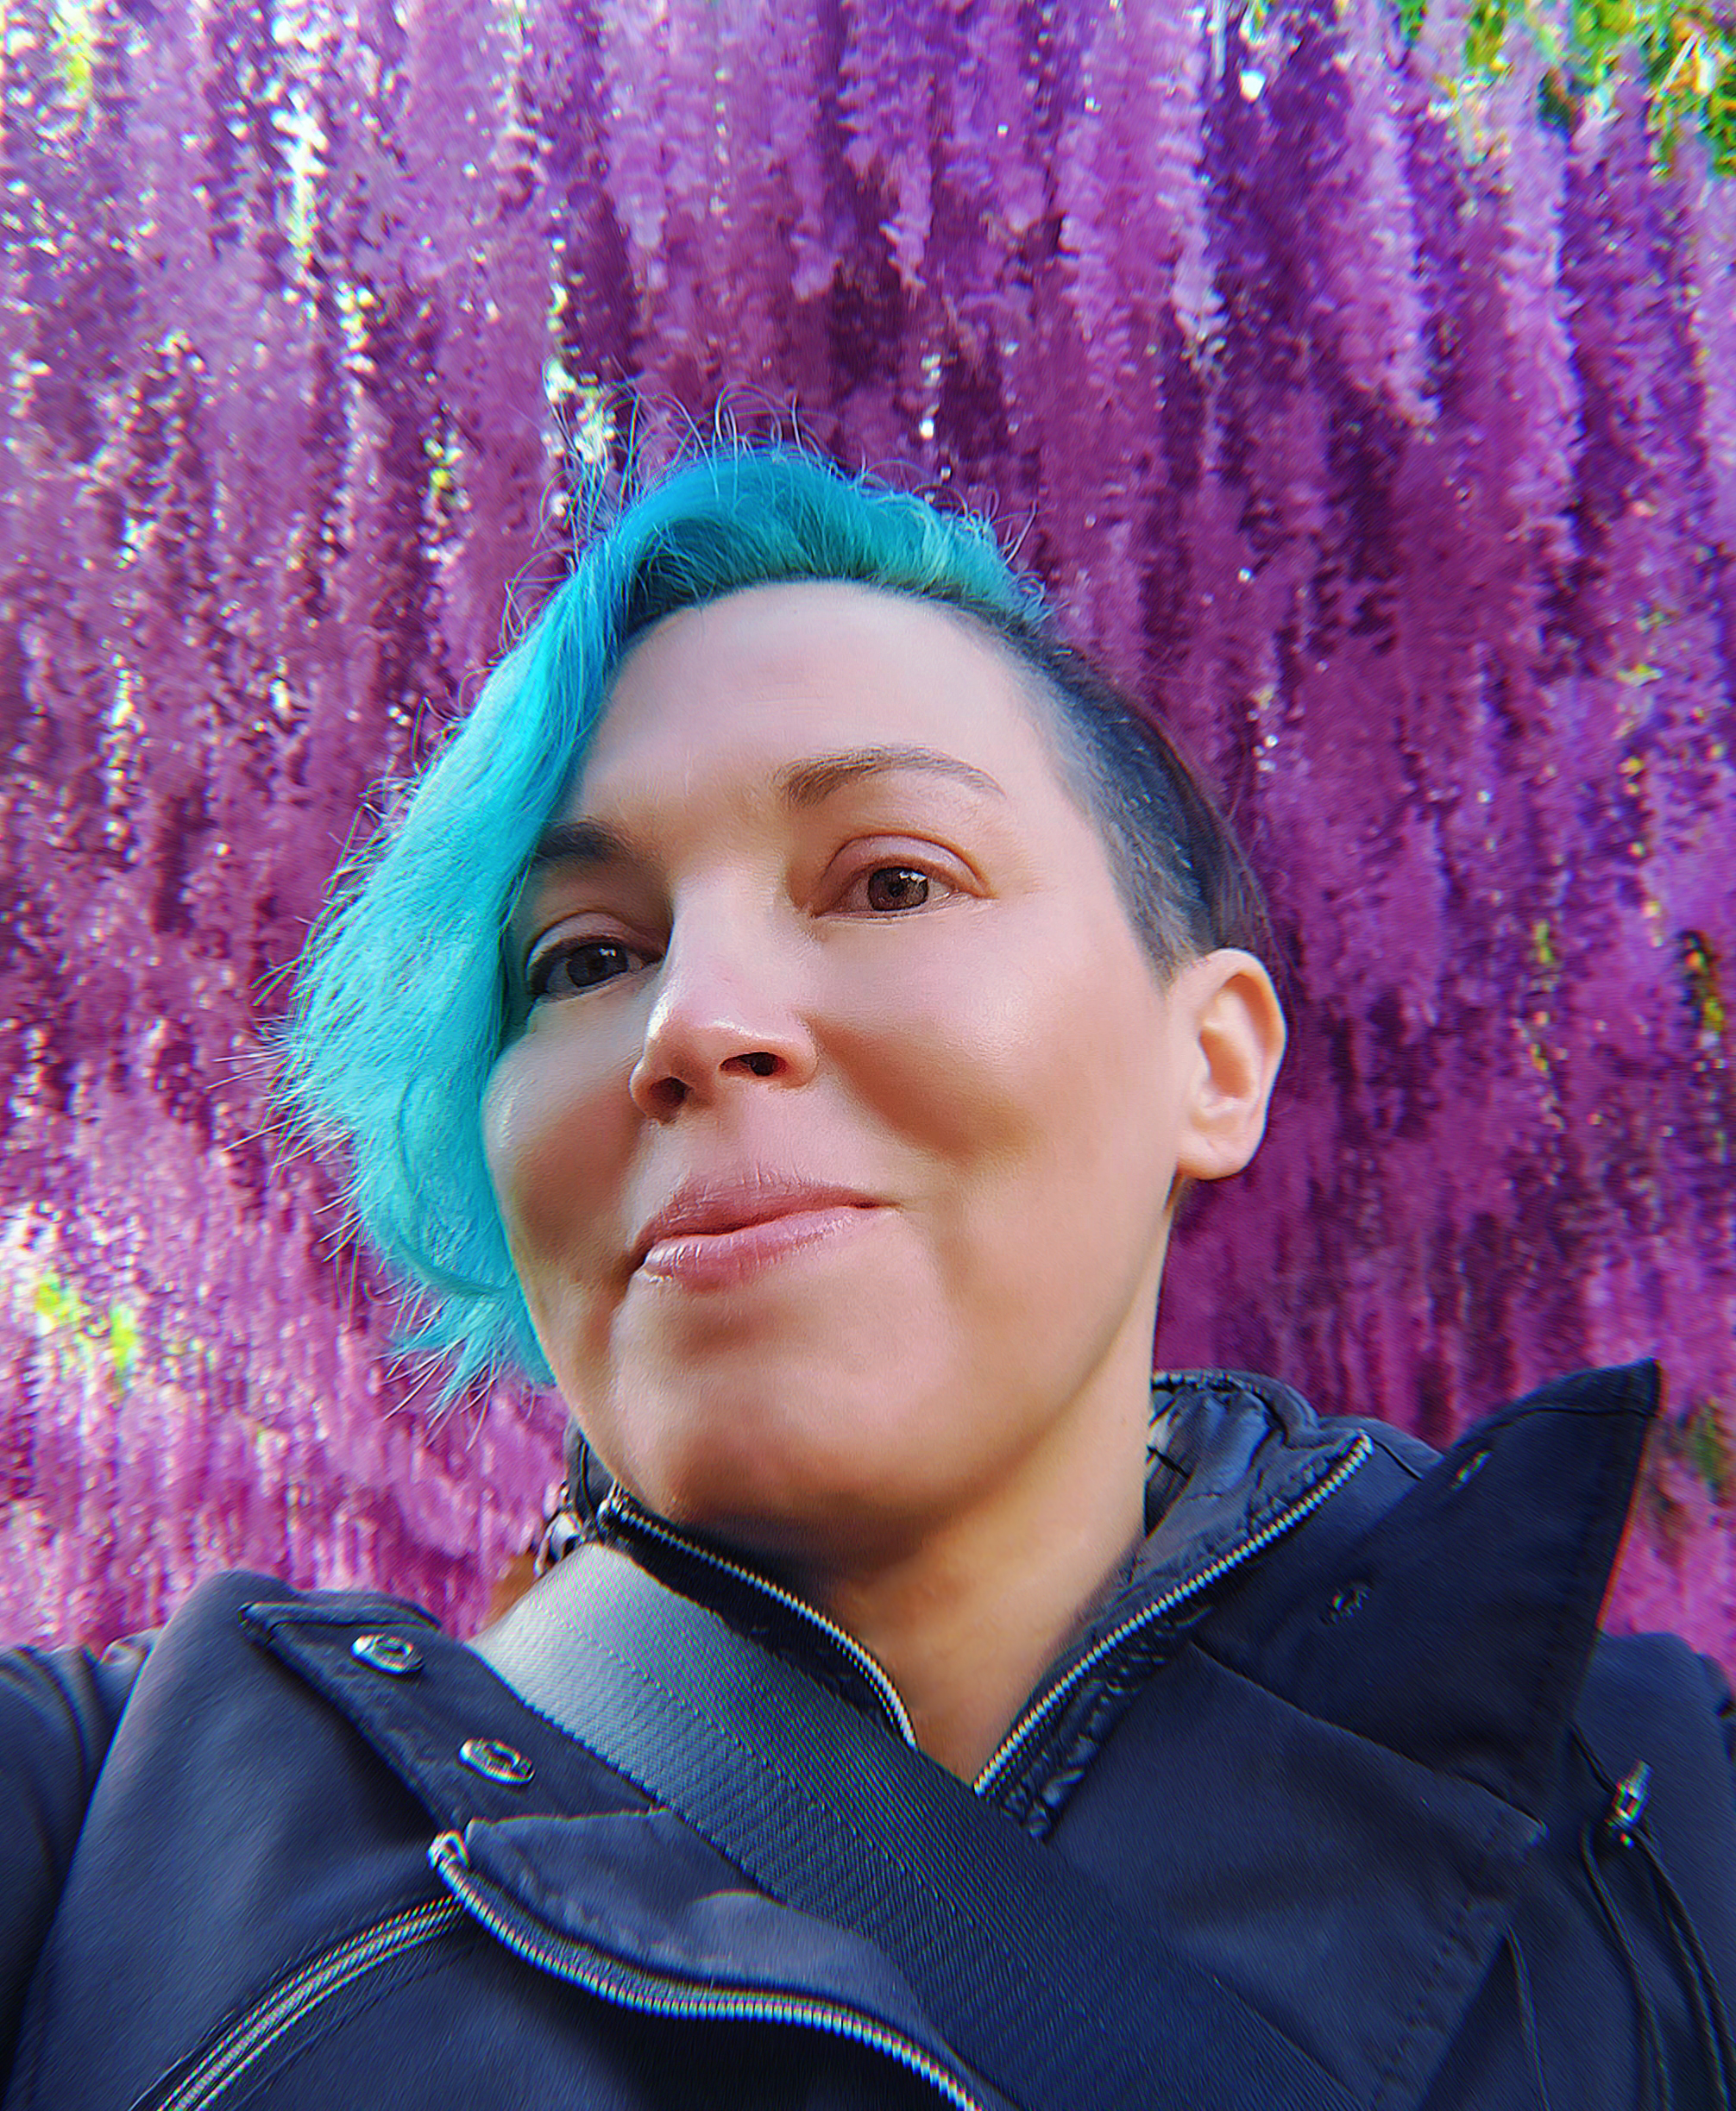 A Native person with light skin and blue hair with shaved sides, smiling. They are wearing a black rain jacket and standing under a tunnel of vibrant purple wisteria flowers.